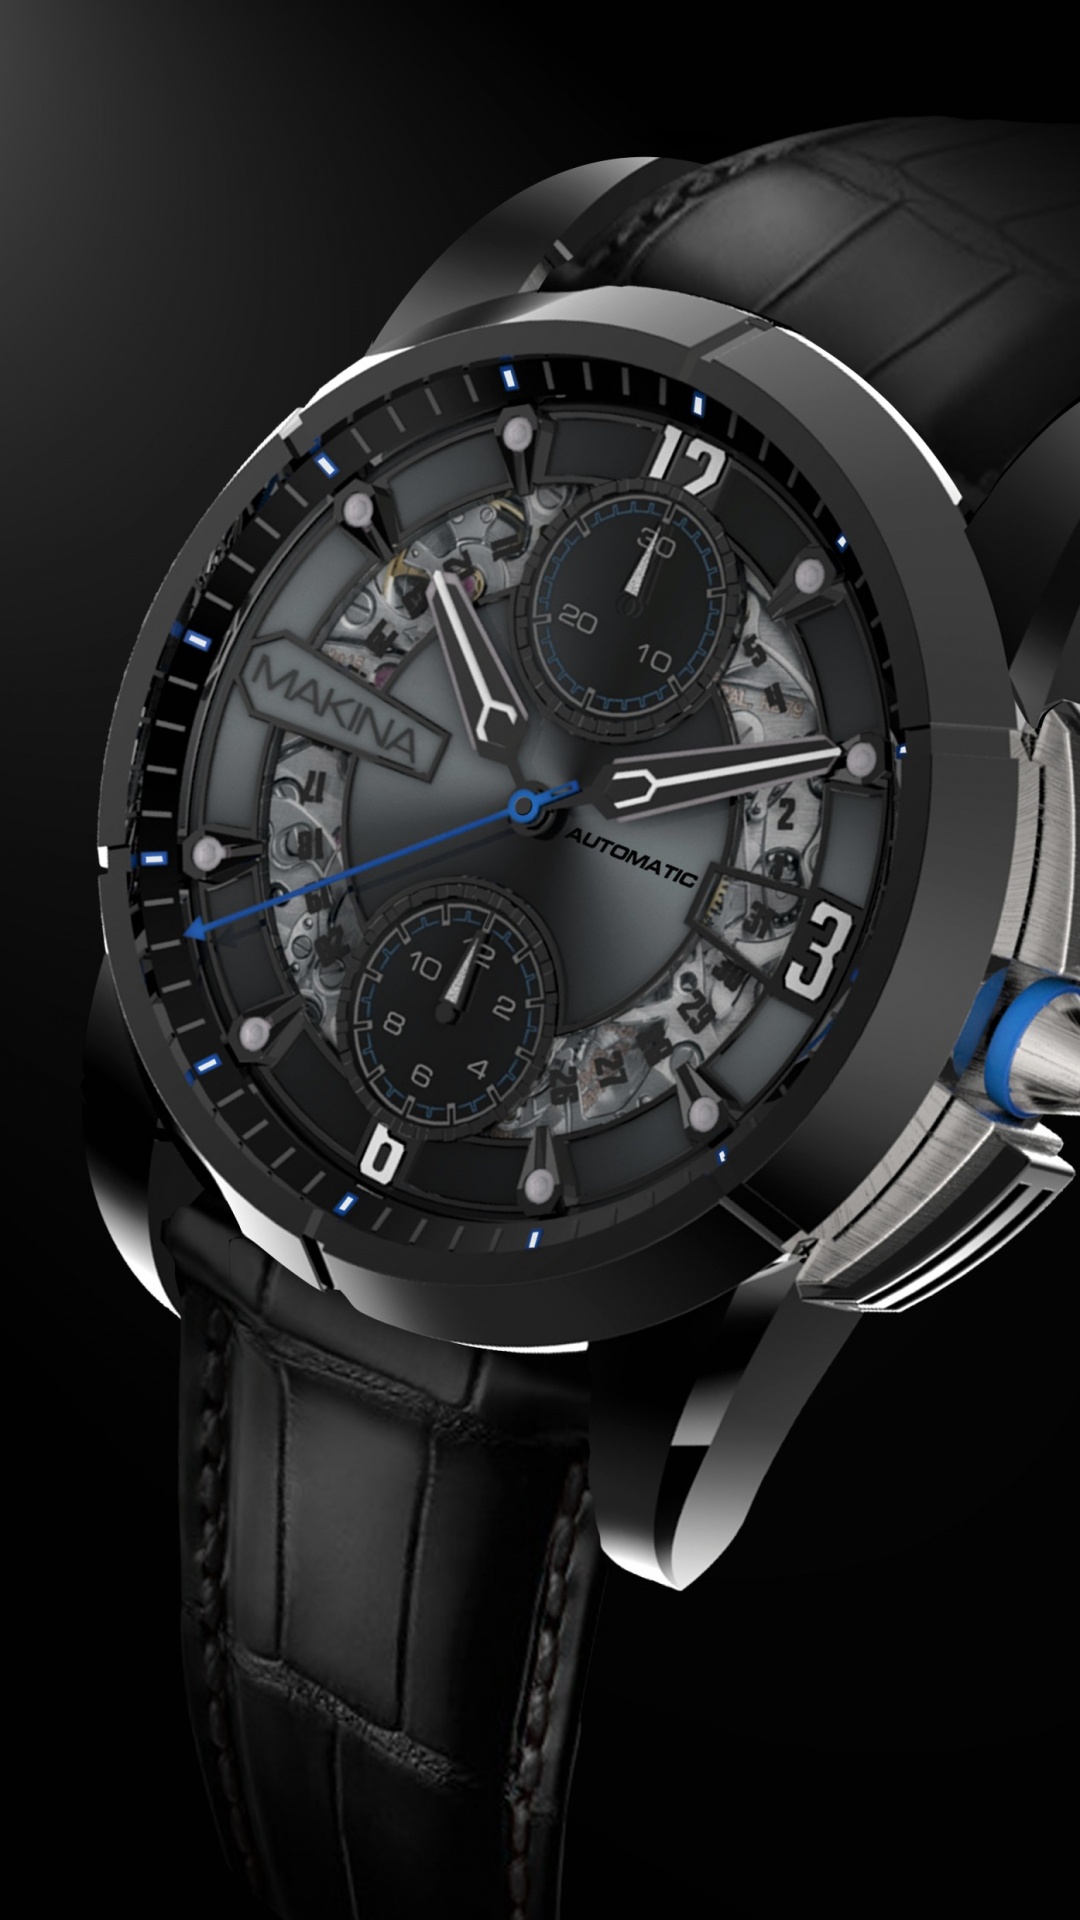 Silver and Blue Chronograph Watch. Wallpaper in 1080x1920 Resolution